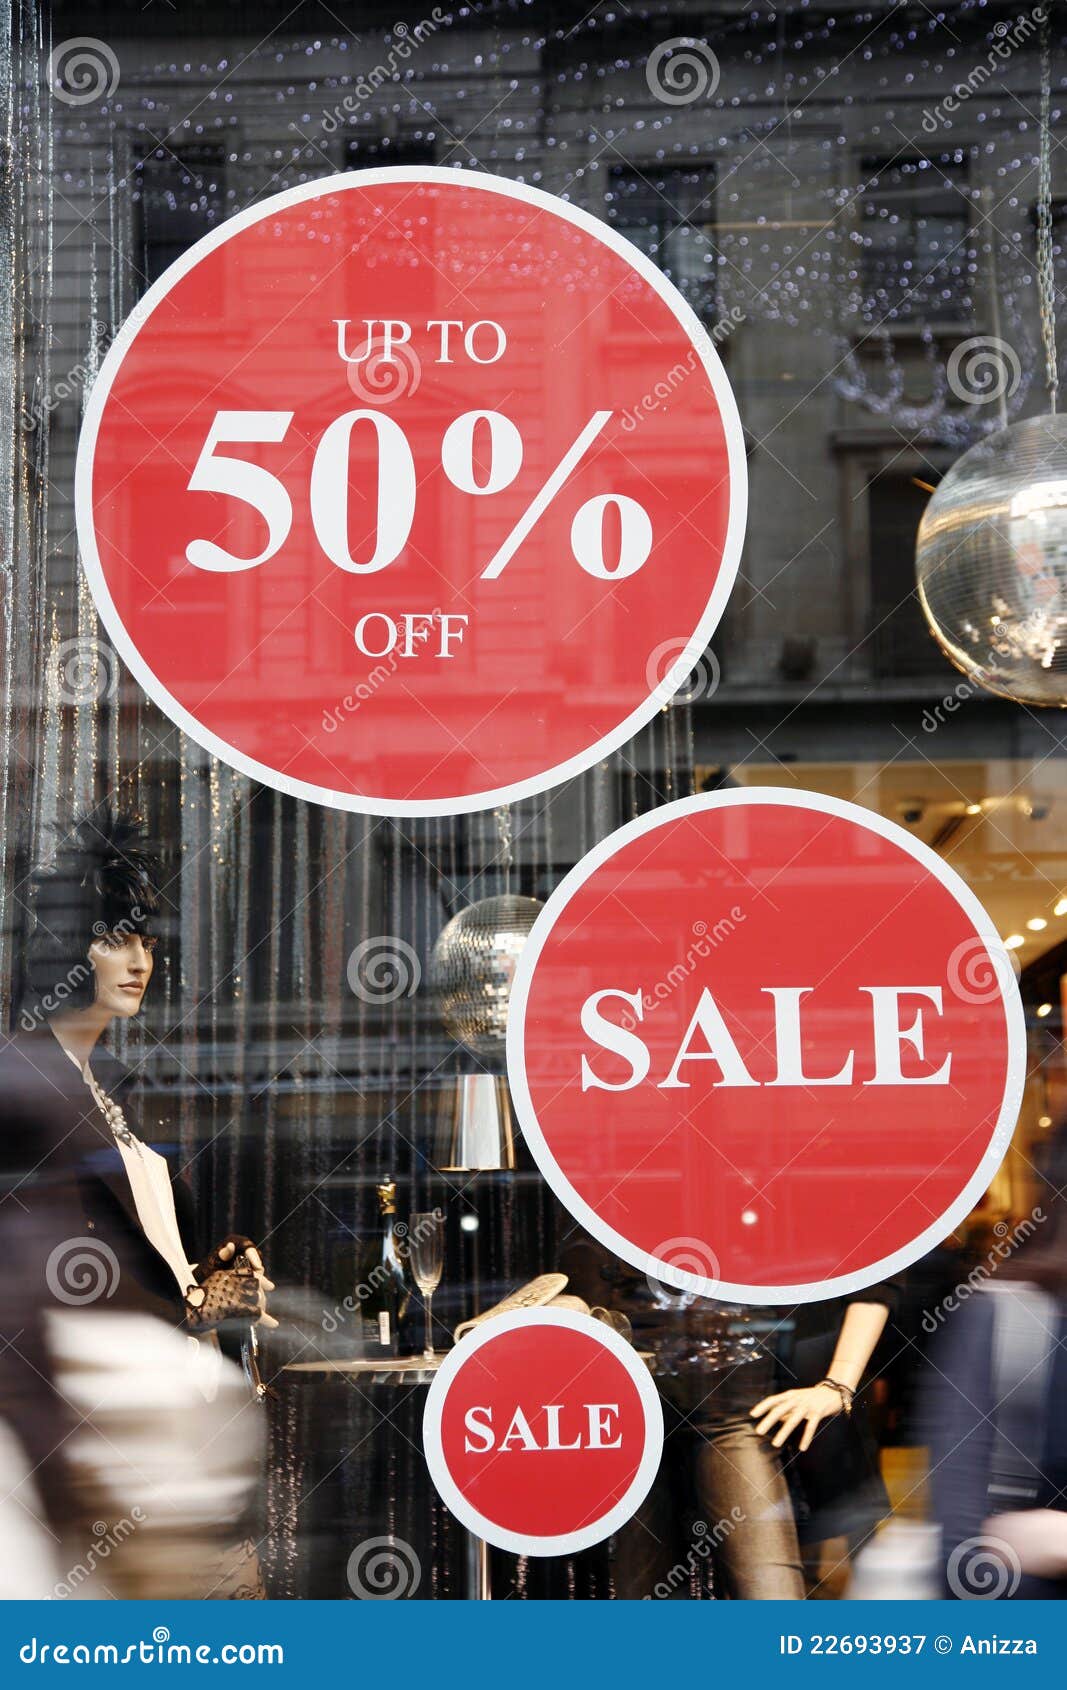 Sale Signs In Shop Window Royalty Free Stock Photography - Image: 22693937